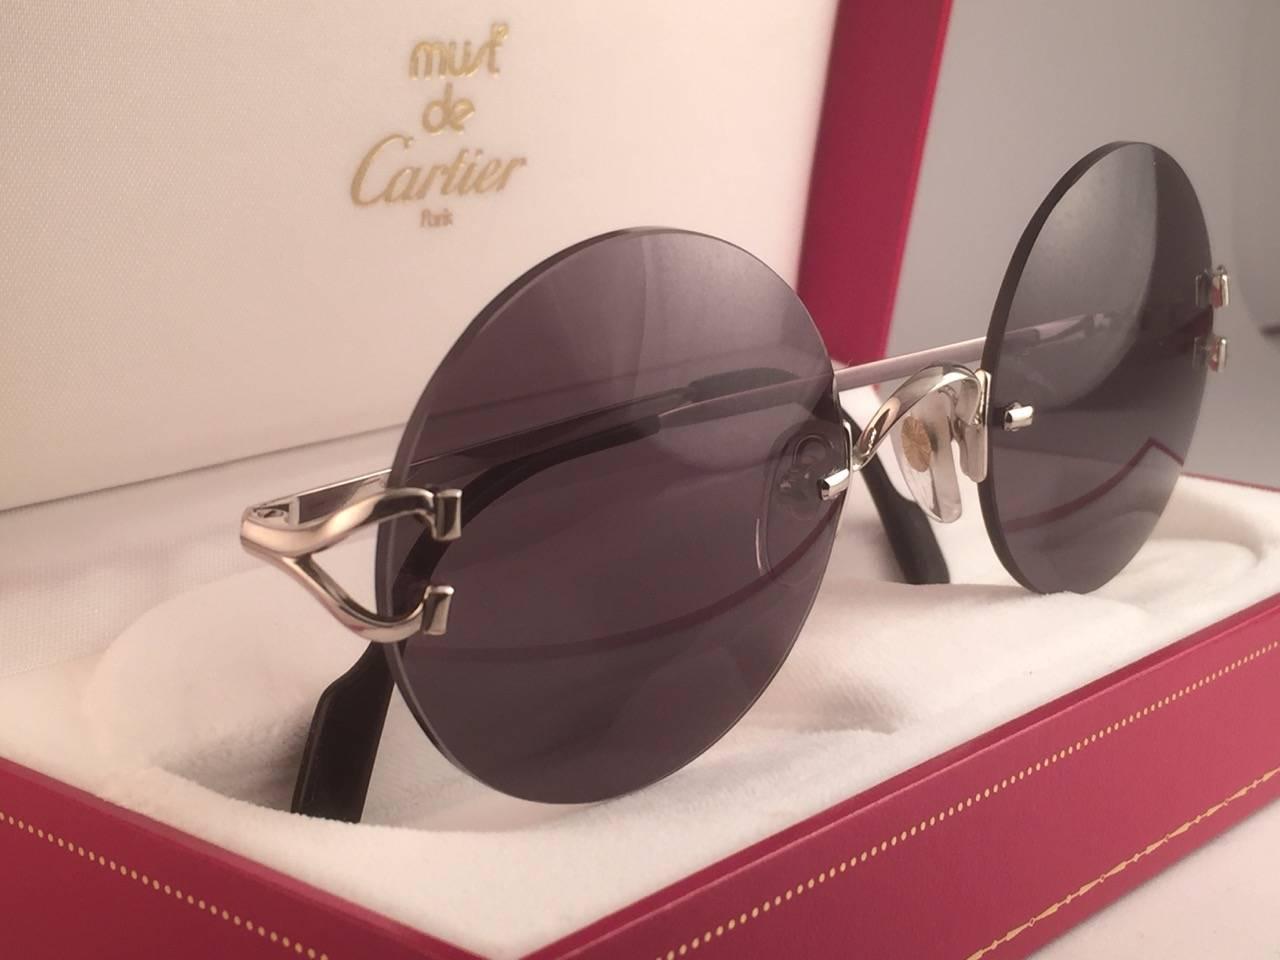 New 1990 Cartier Madison unique rimless sunglasses with grey (uv protection) lenses. 
Frame with the front and sides in Platine. 
Cartier Platine signs on the onyx black ear paddles. 
These are like a pair of jewels on your nose. 
Please notice this